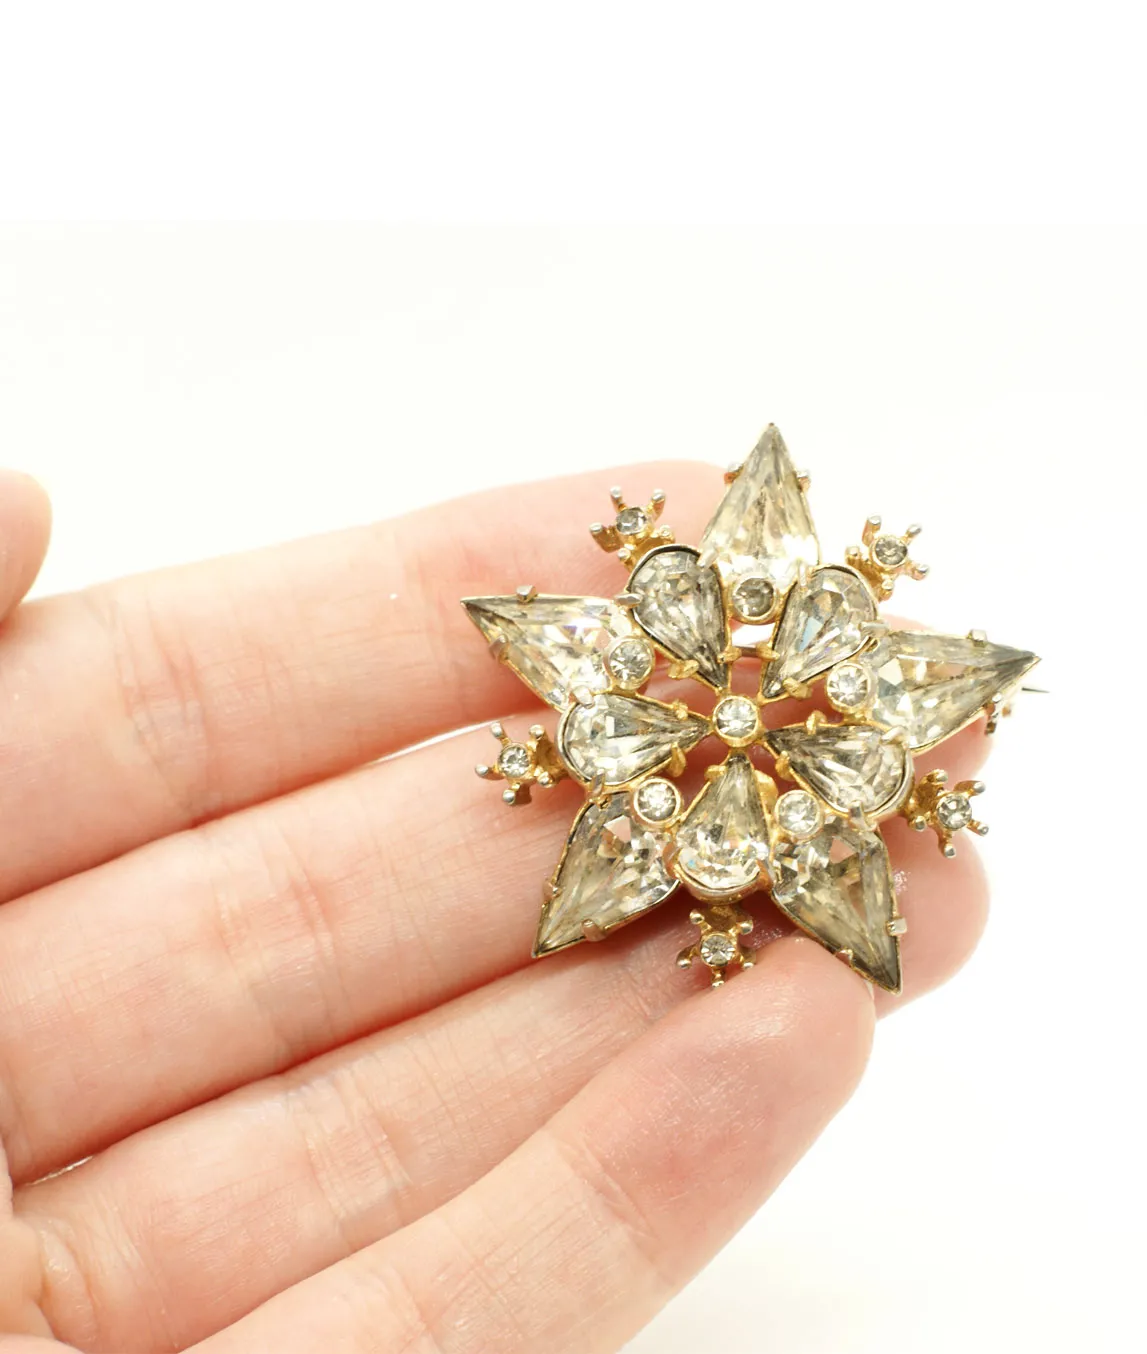 Eisenberg star pin in the hand